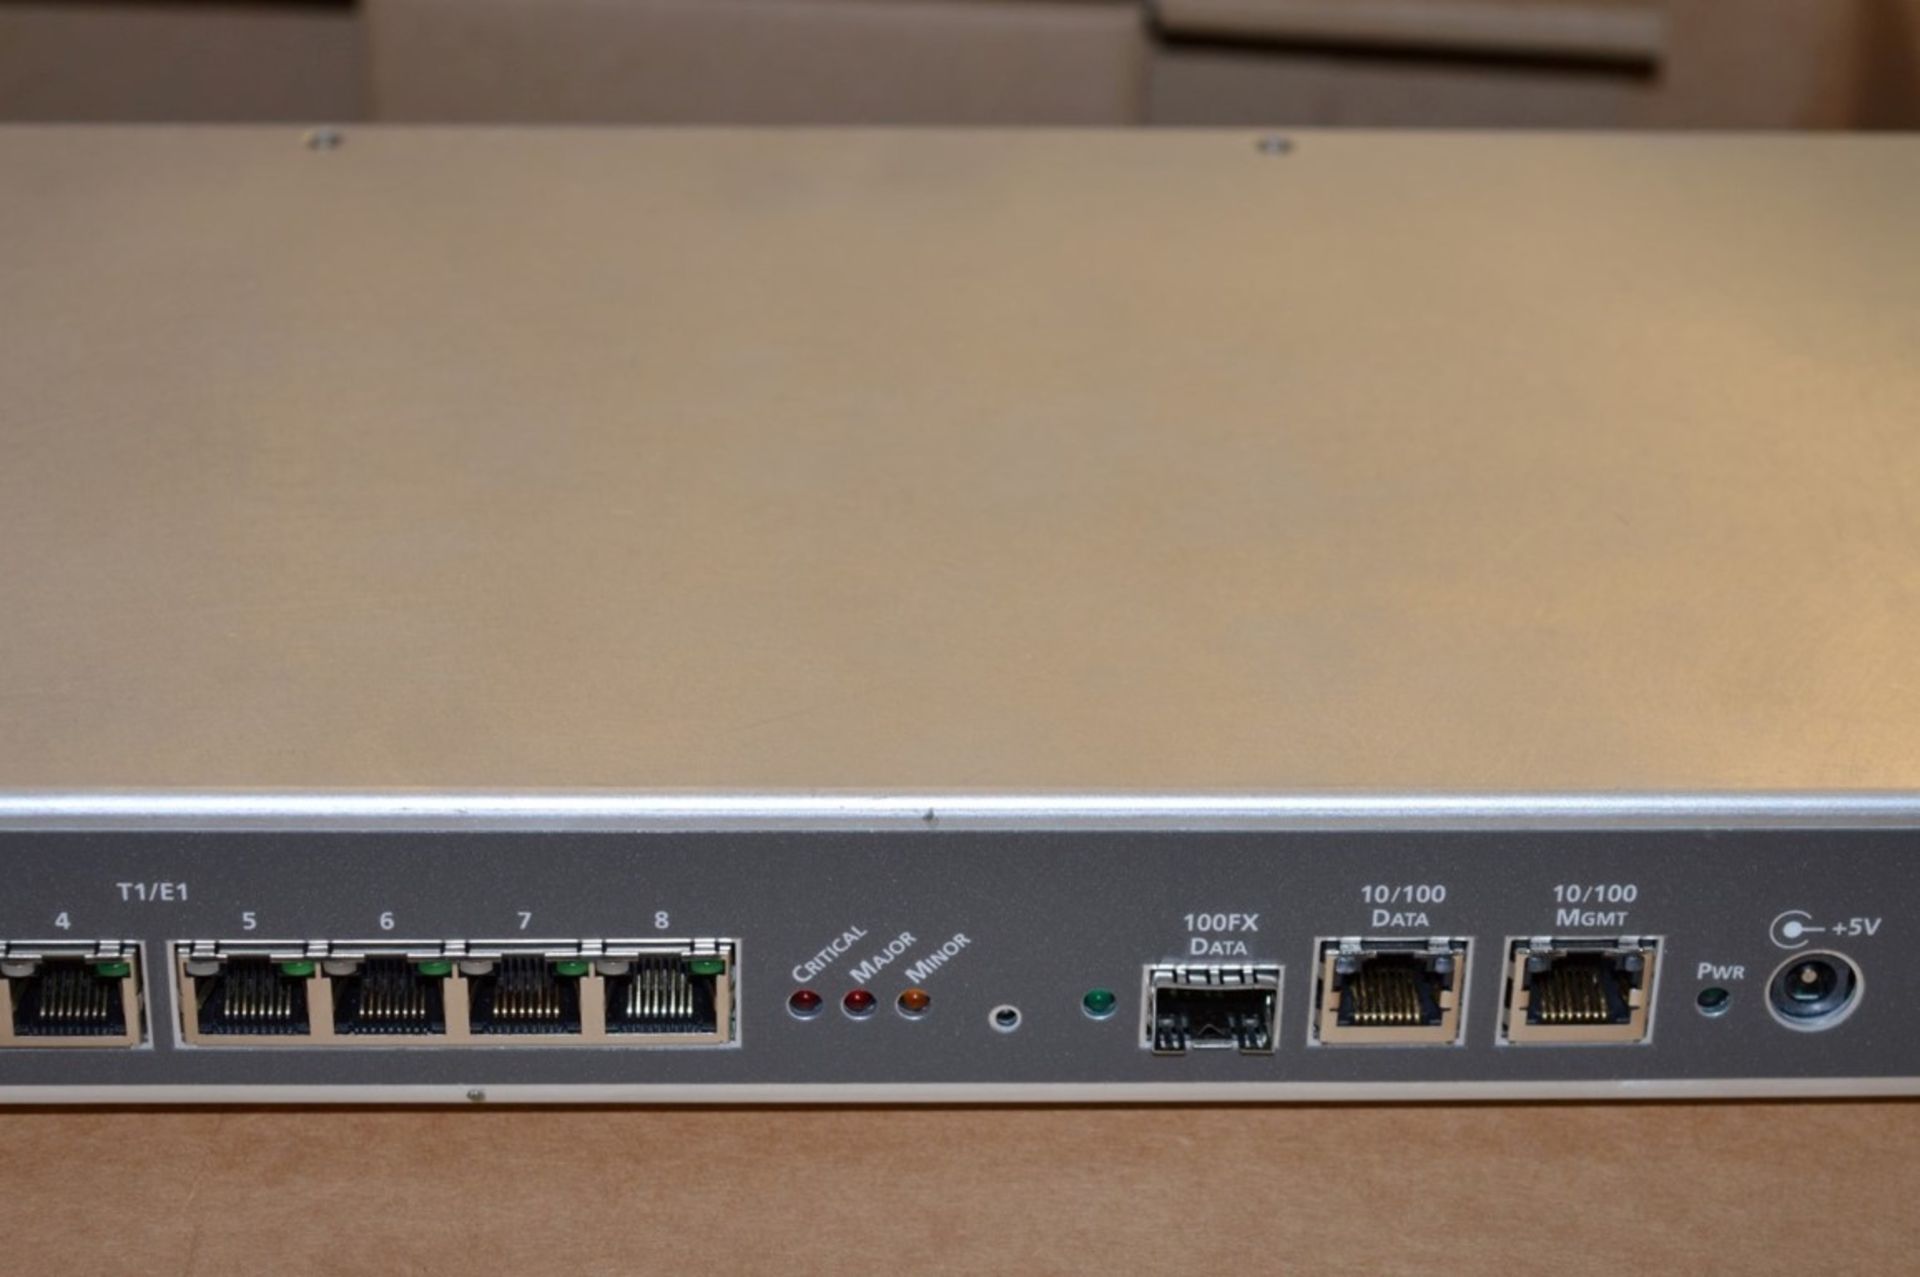 1 x Overture Networks ISG 180 Carrier Ethernet Over T1/E1 Edge - Model 5262-930A - Brand New and - Image 7 of 11